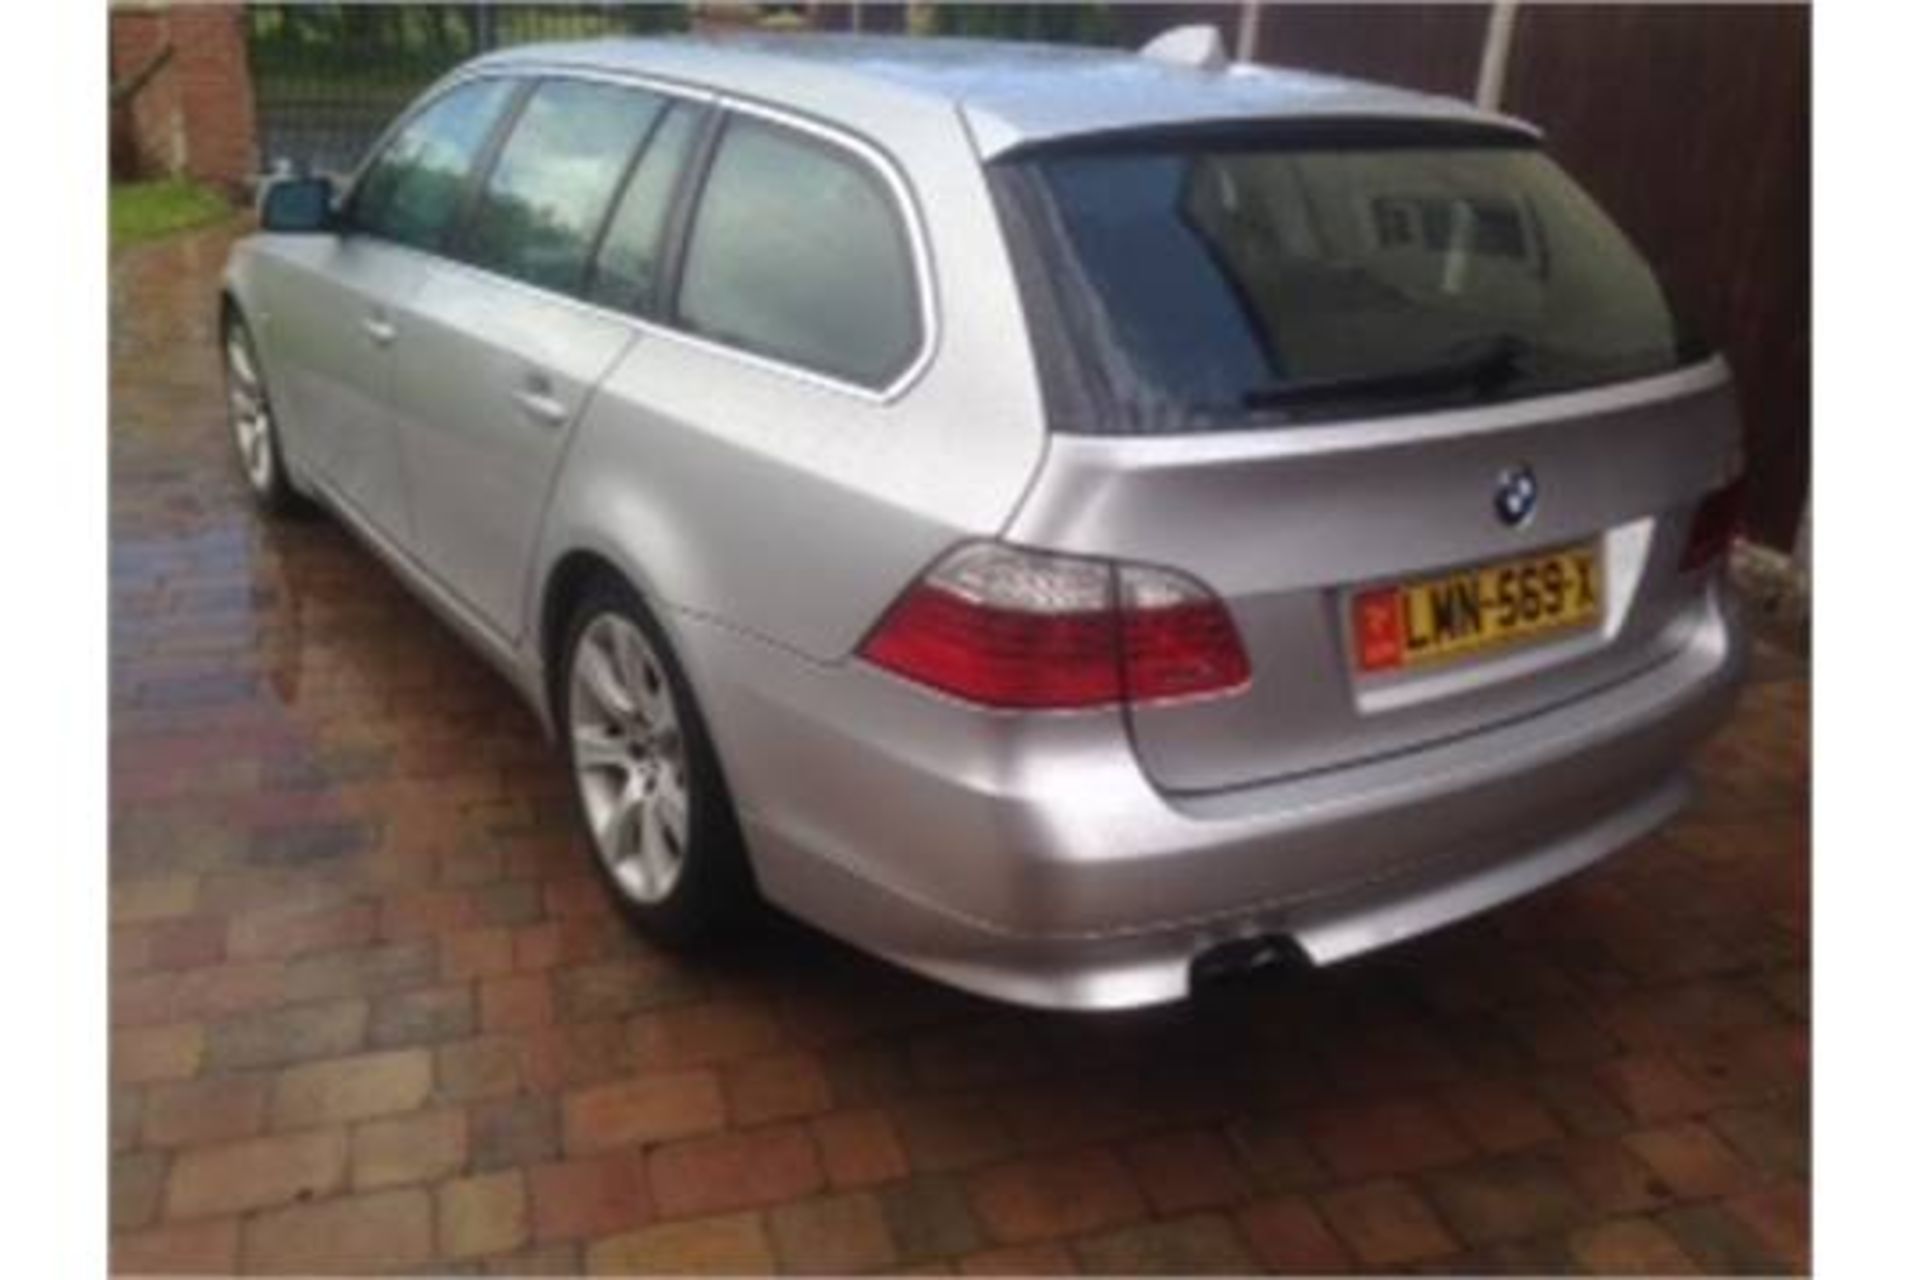 BMW 5 SERIES TOURING 530D, BX58 PNN, 3.0L TD 6 SPEED, DIESEL, AUTOMATIC I DRIVE, 5 DOOR, 95,000 - Image 5 of 10